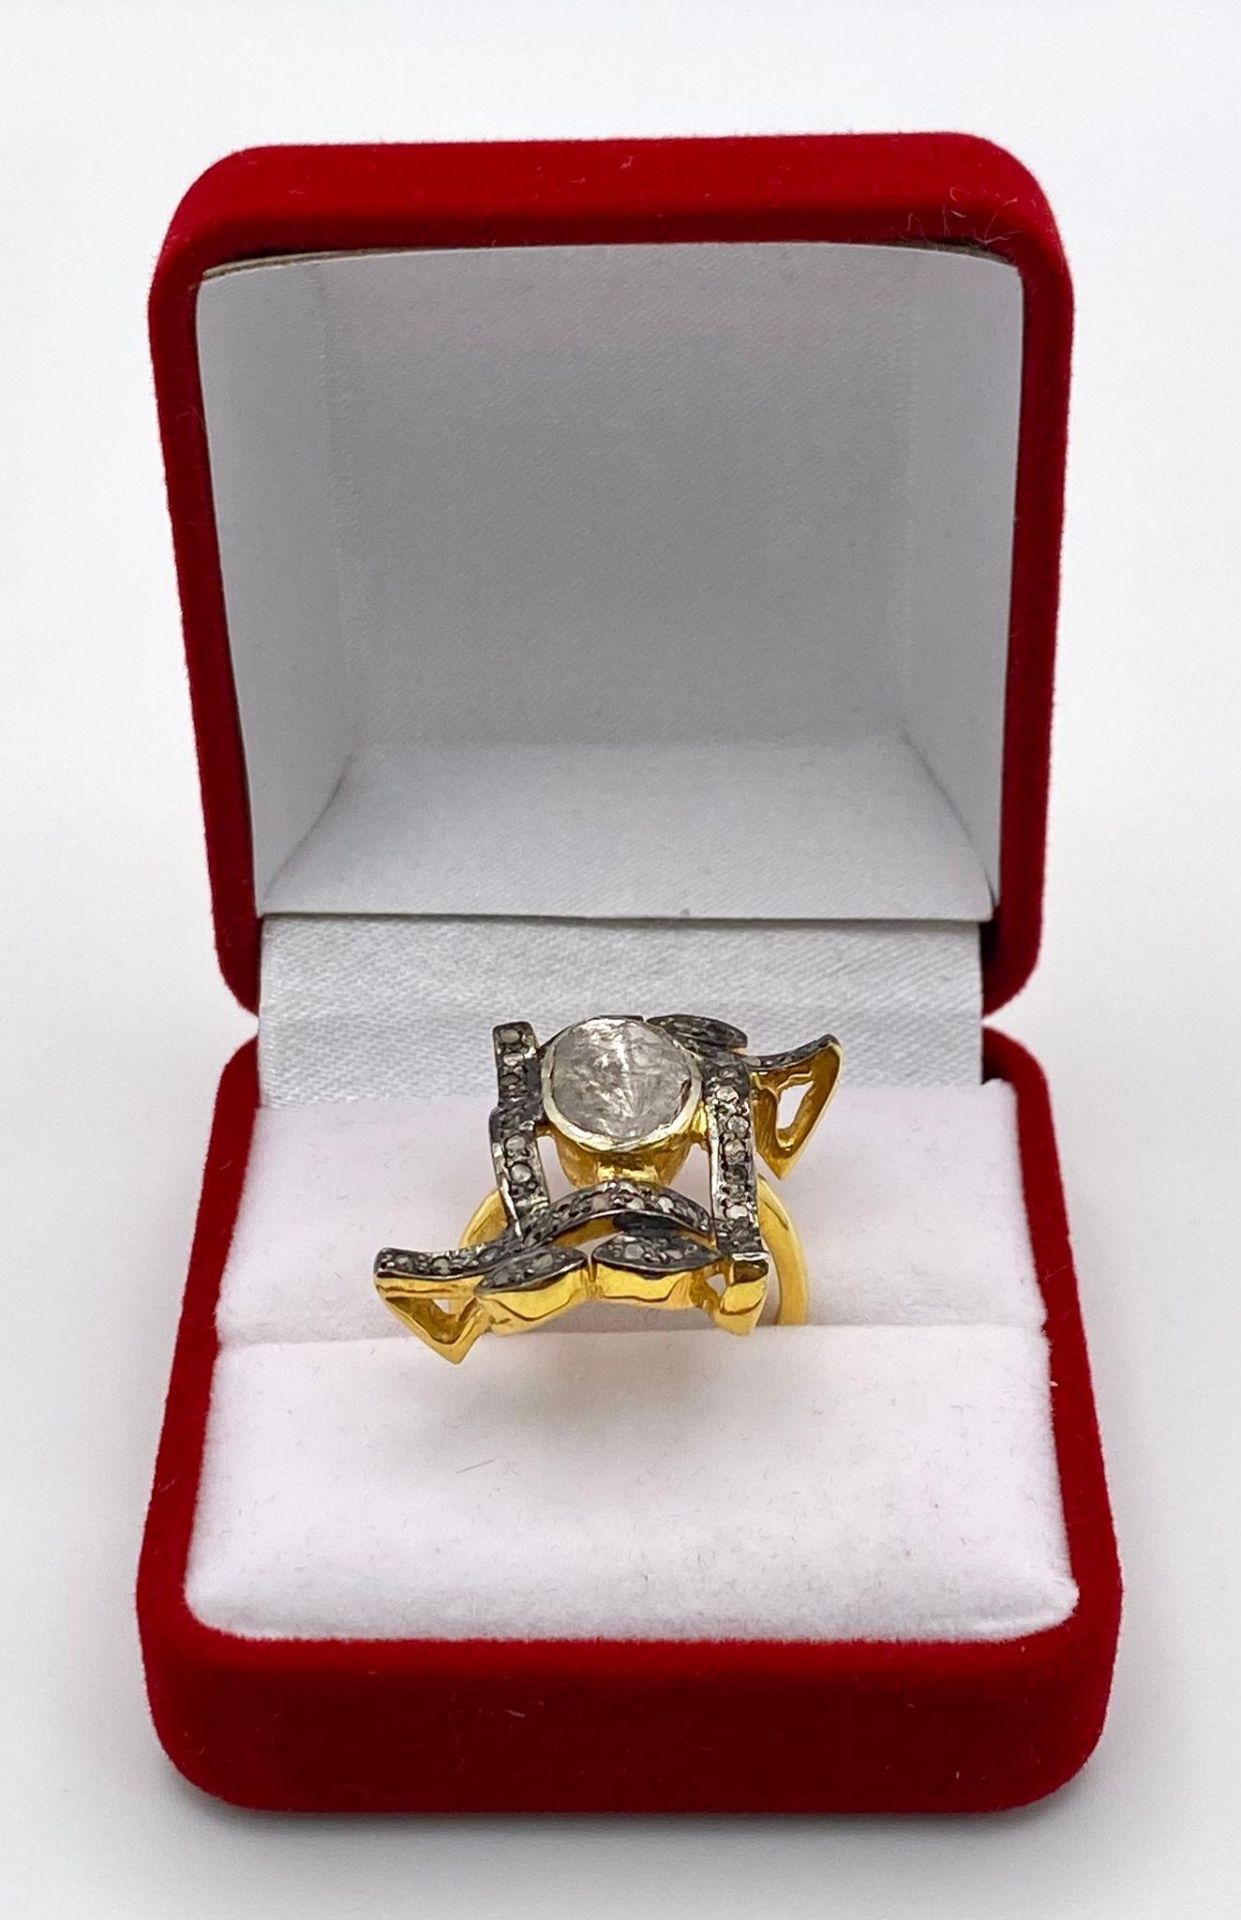 A spectacular, antique silver and gold ring with a large natural, old cut diamond (2.80 carats - Image 4 of 5